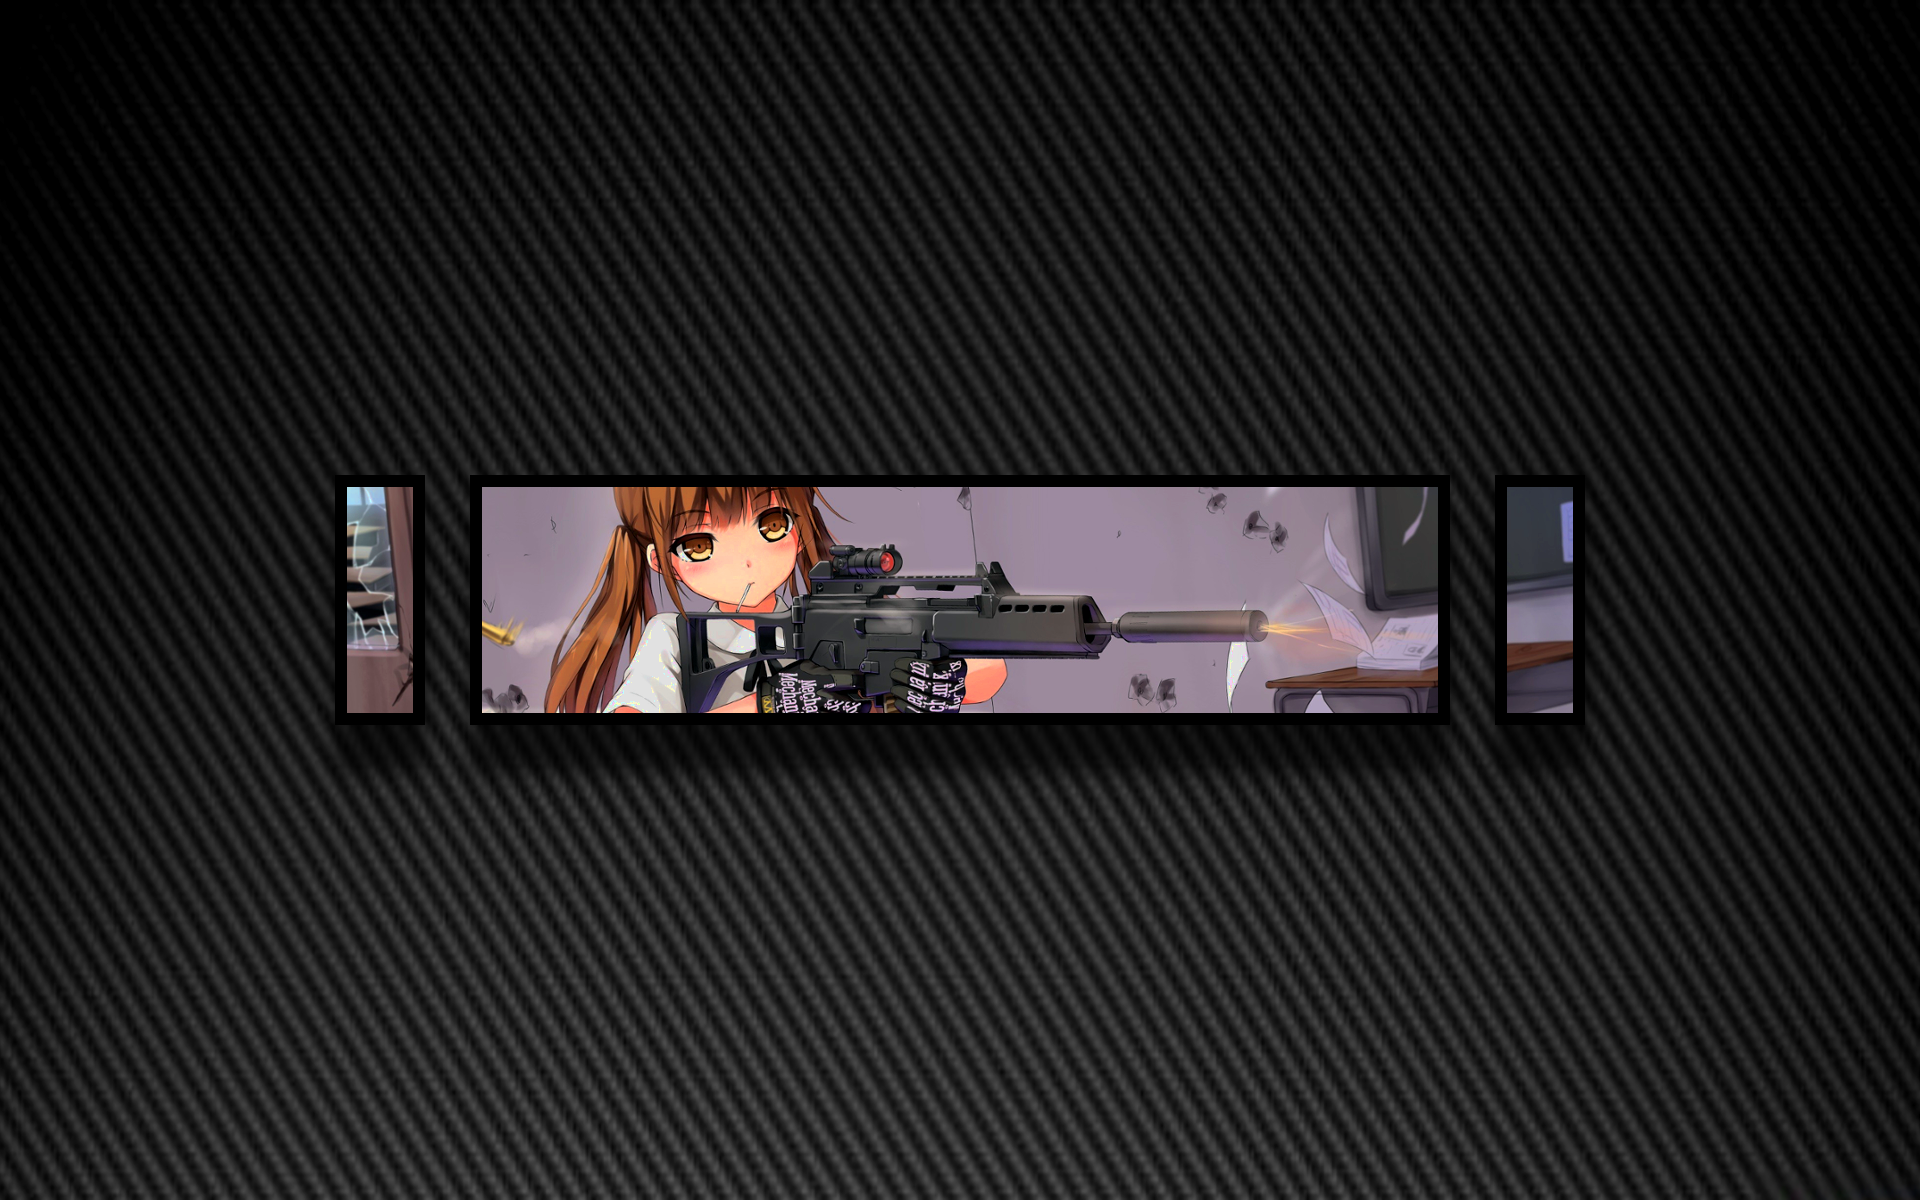 Anime 1920x1200 anime girls girls with guns picture-in-picture